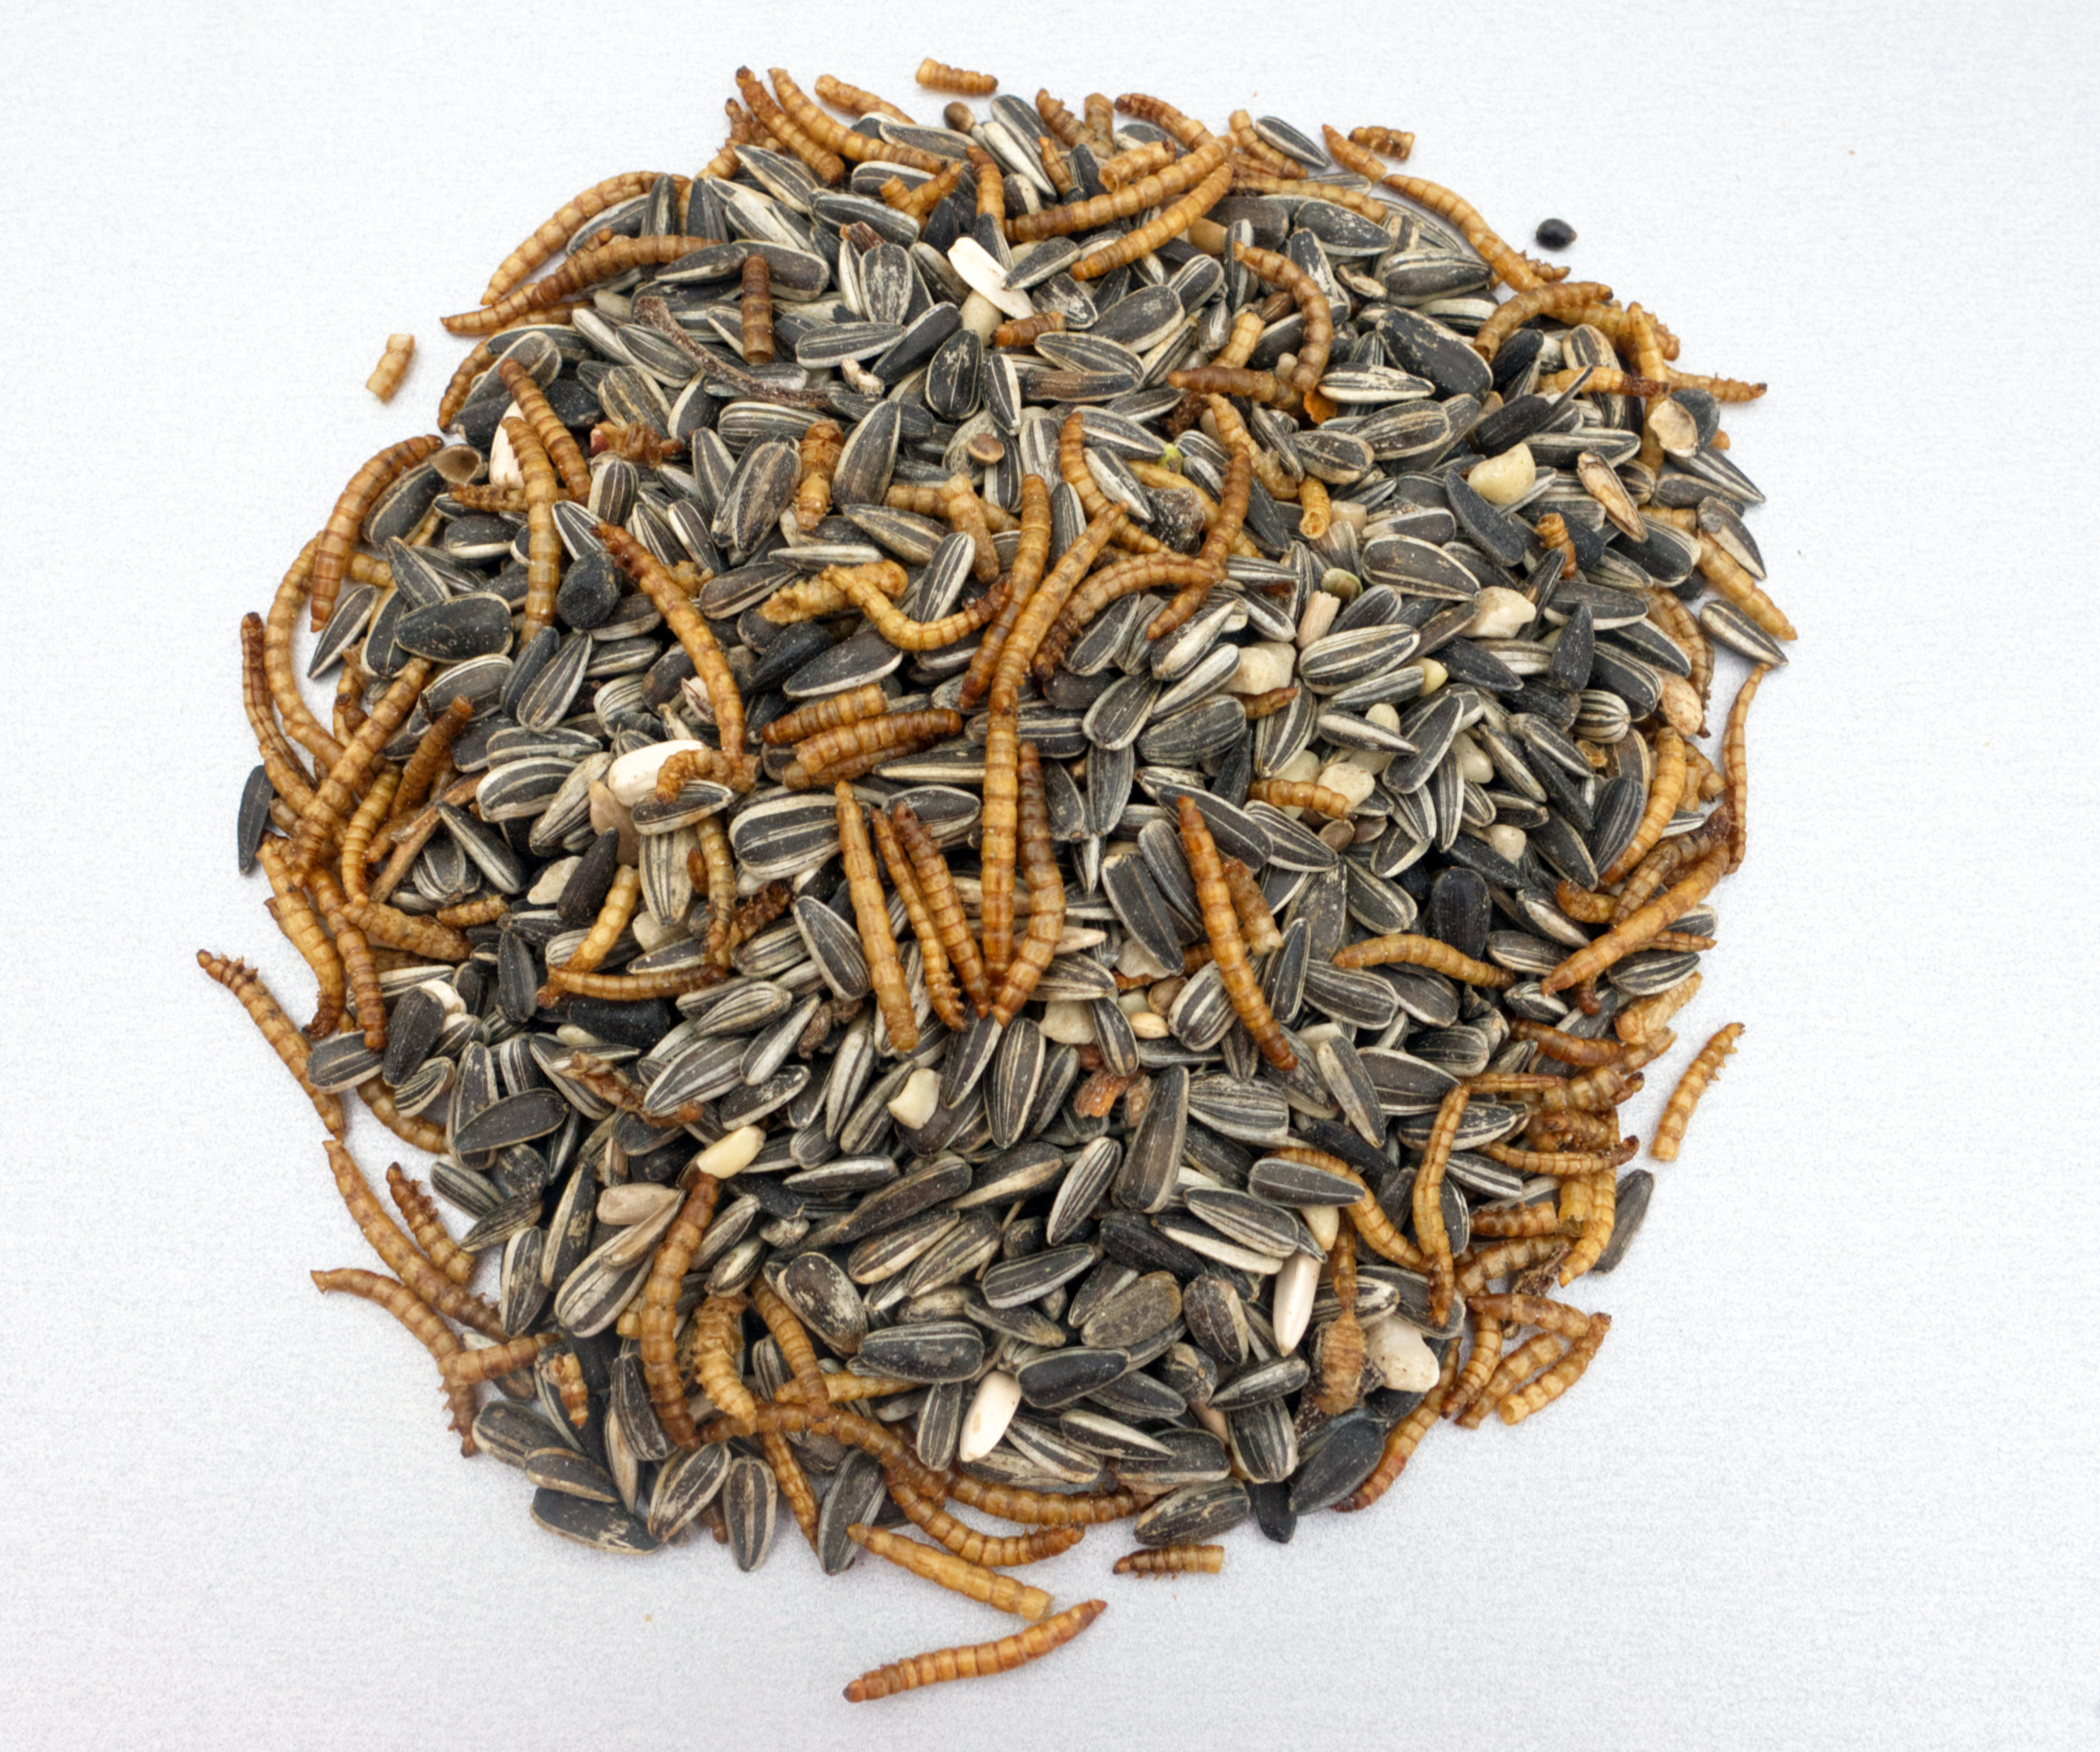 The picture shows a heap of classic garden bird food with sunflower seeds and other seeds - and with whole, dried mealworms.